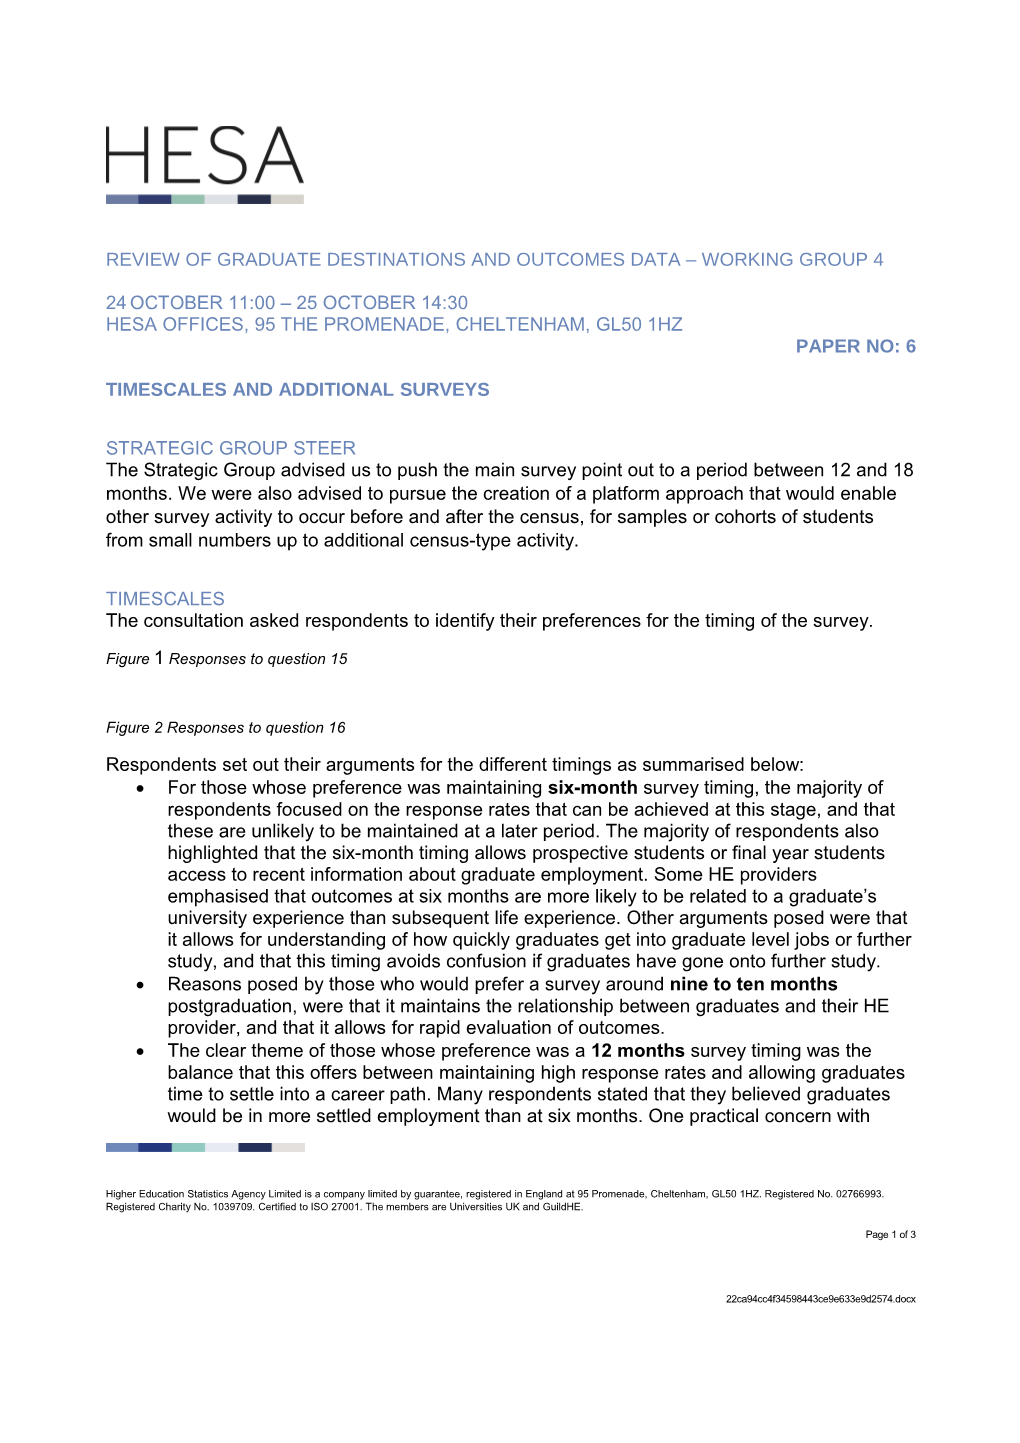 Review of Graduate Destinations and Outcomes Data Working Group 4